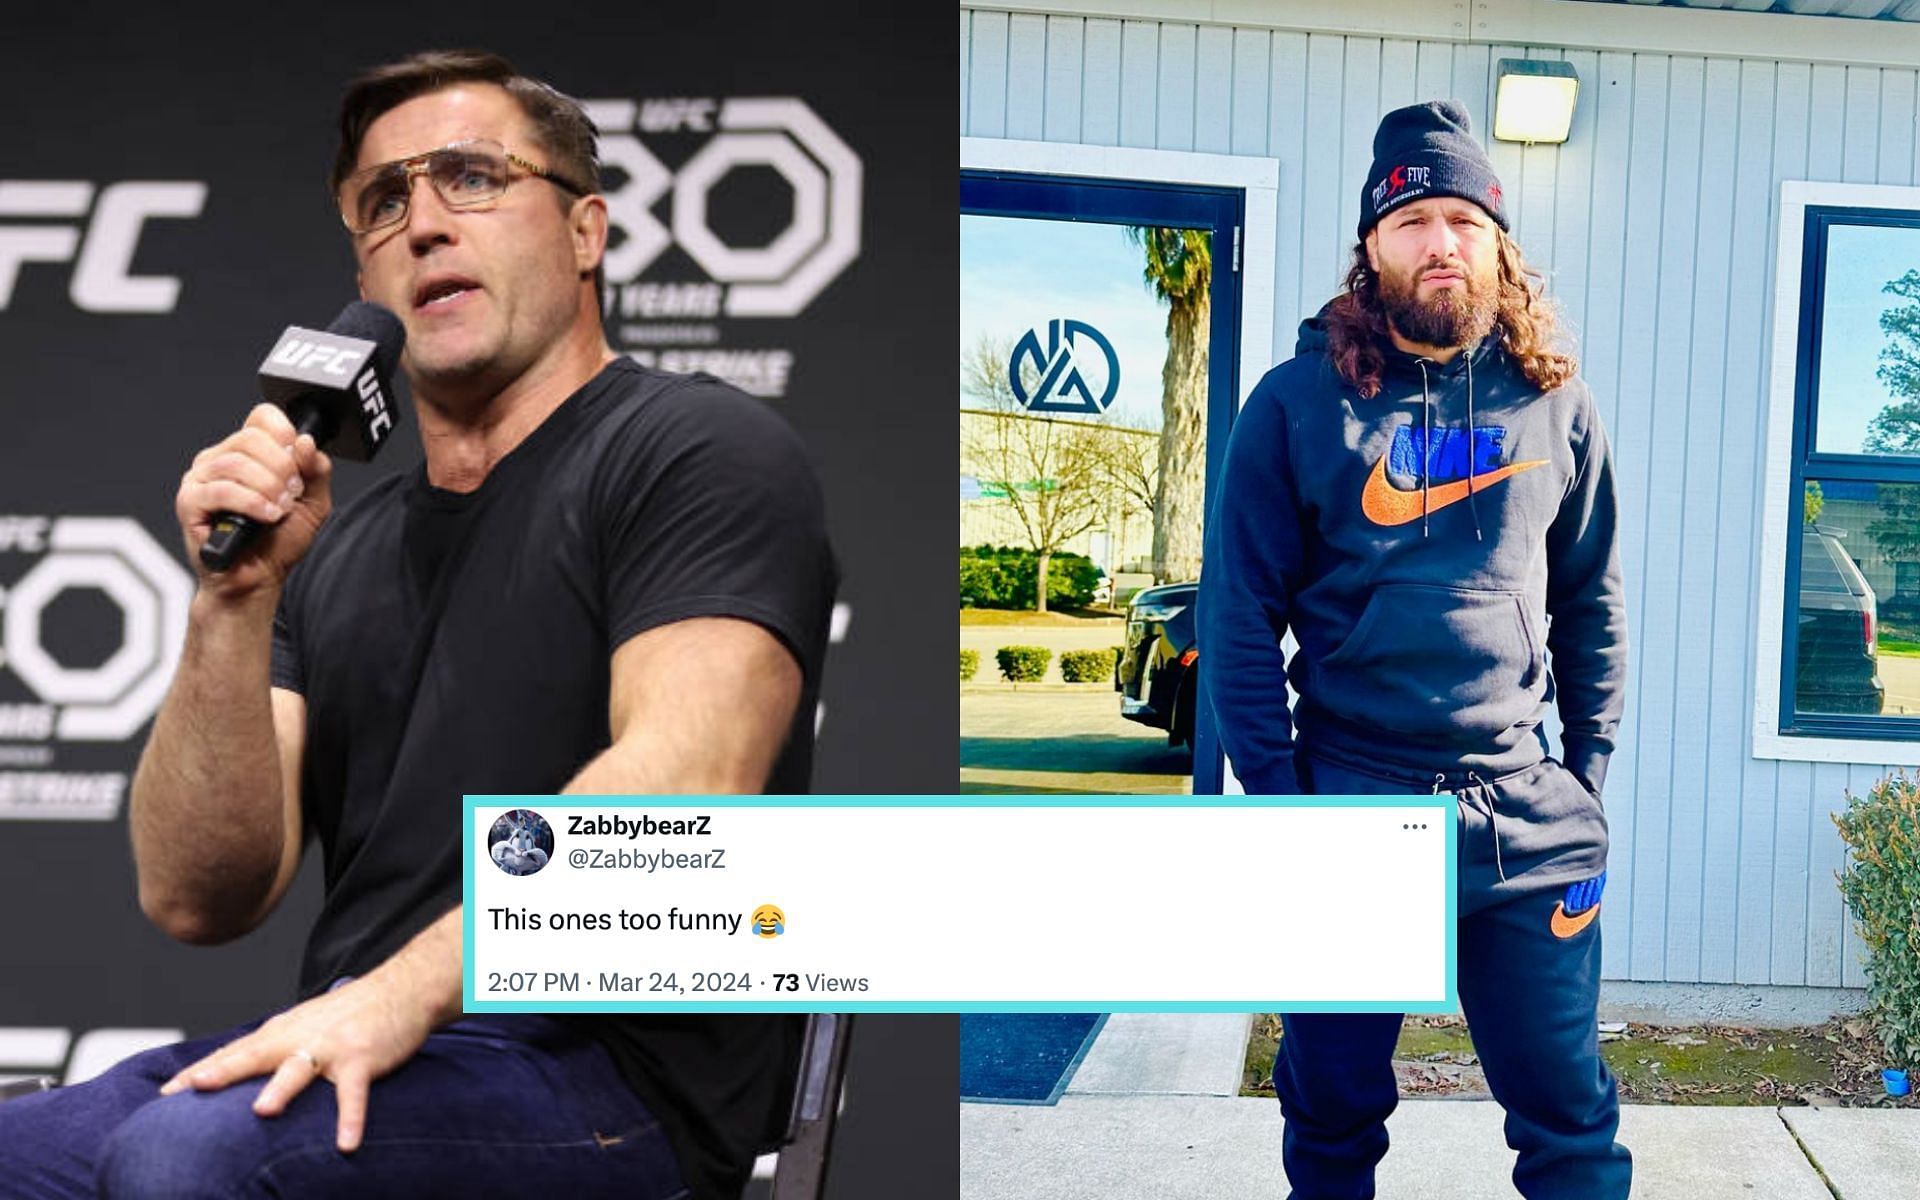 Chael Sonnen (left) takes more shots at Jorge Masvidal (right) on social media [Photo Courtesy of Getty Images and @gamebredfighter on Instagram]